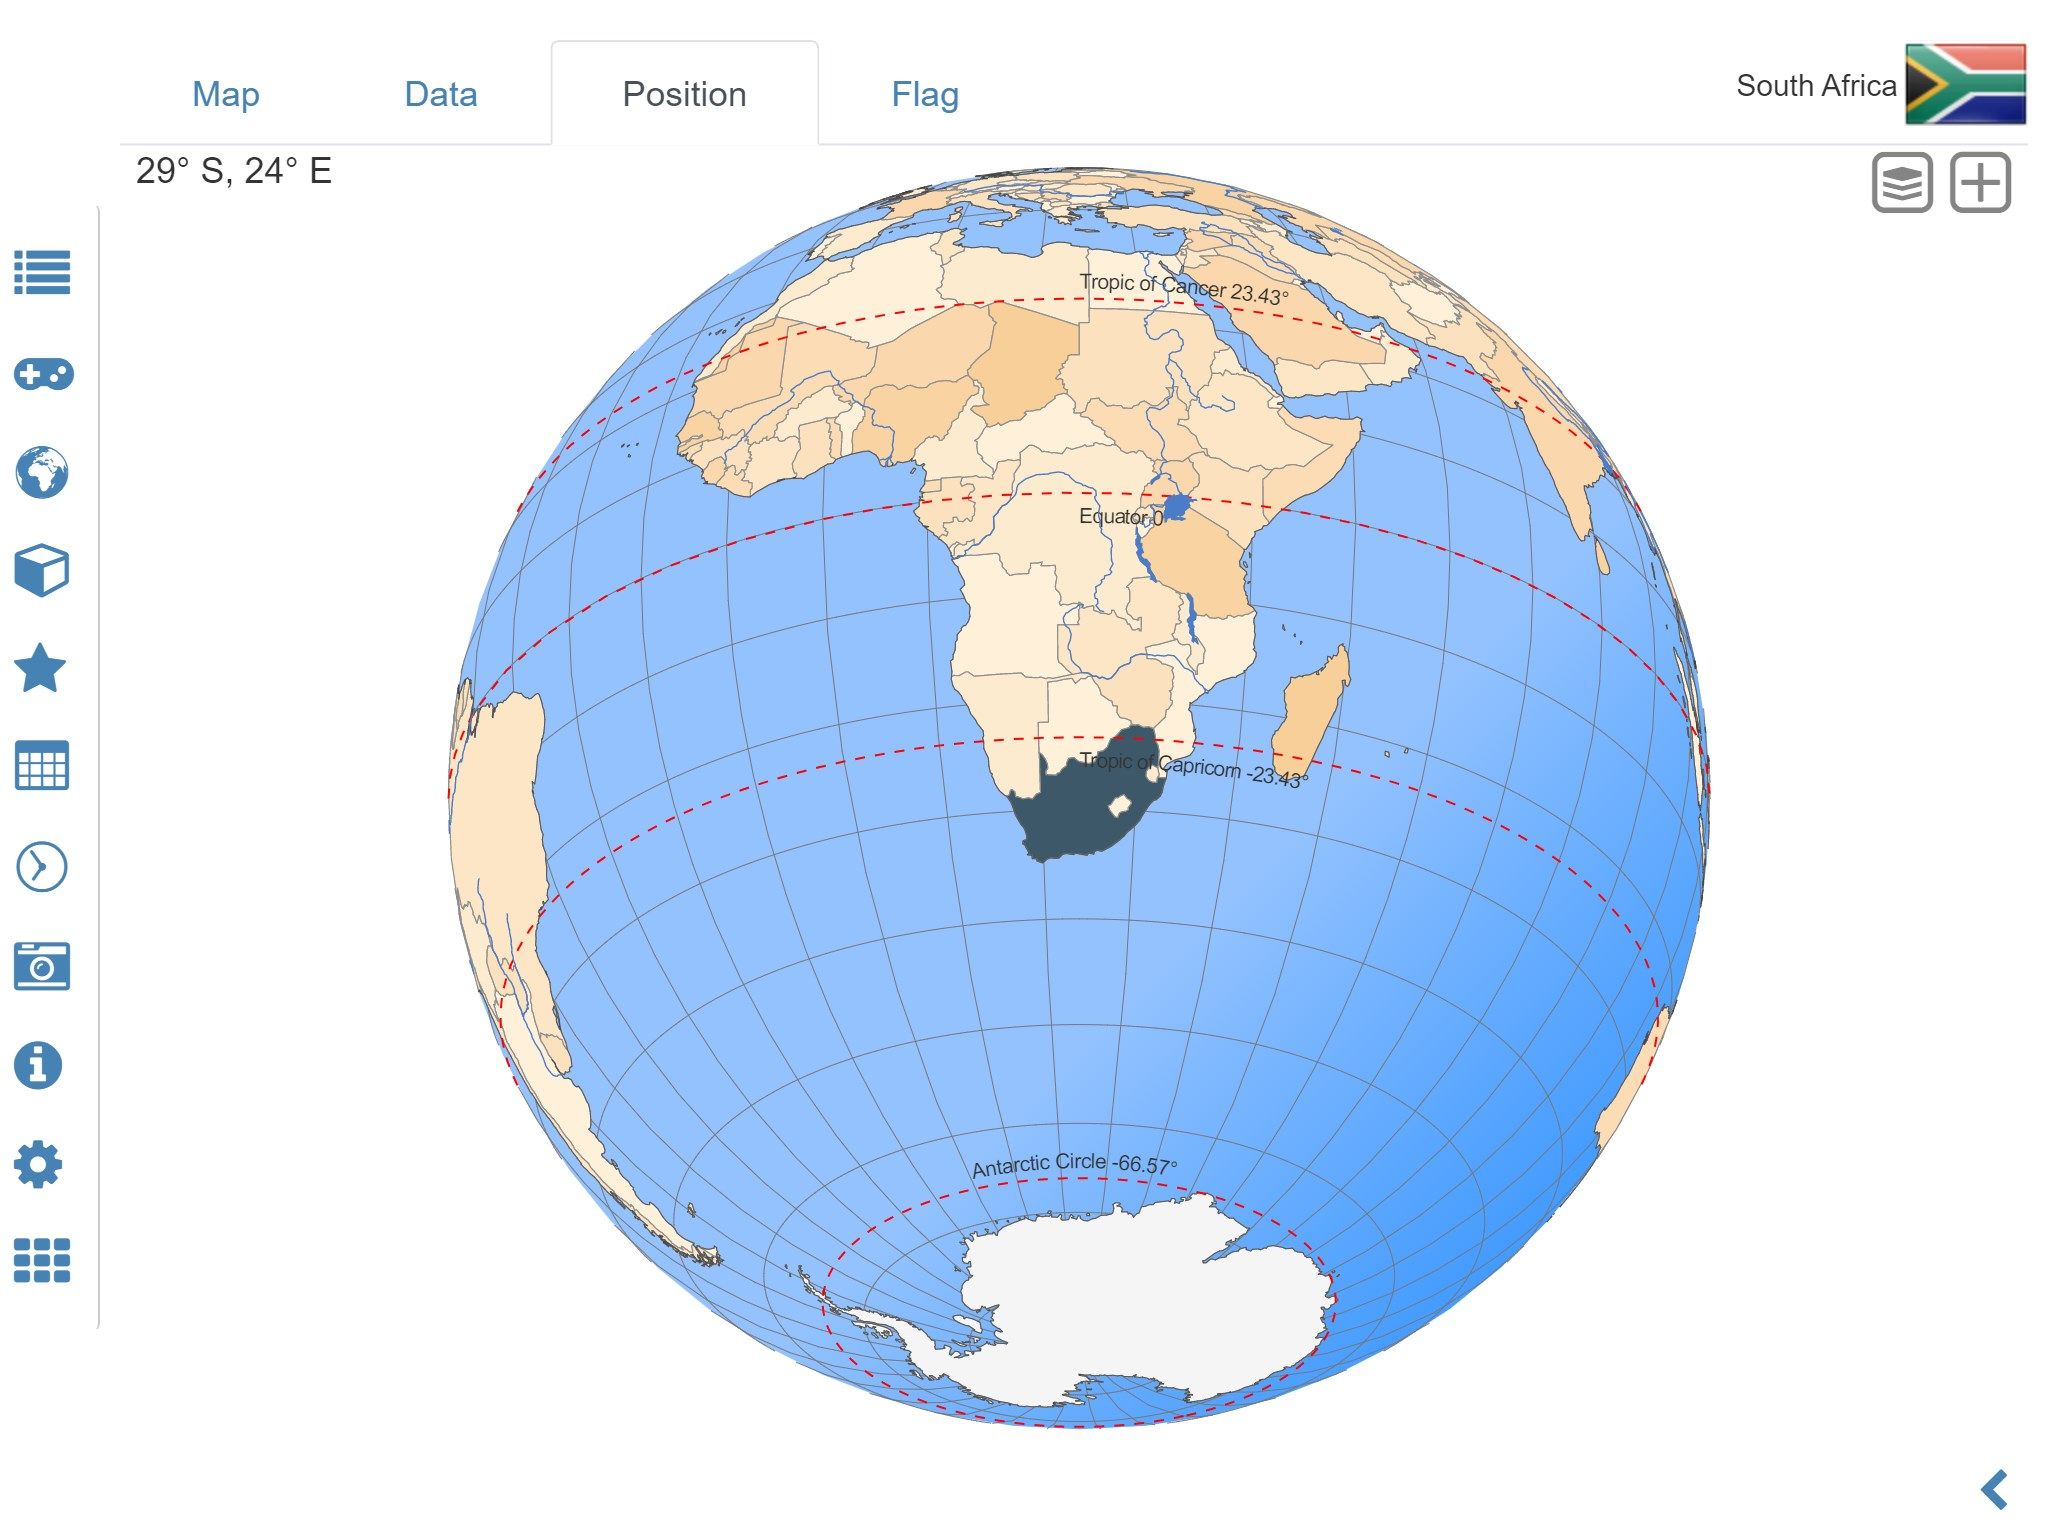 Learn where each country in the world is located. View its position highlighted on a digital globe